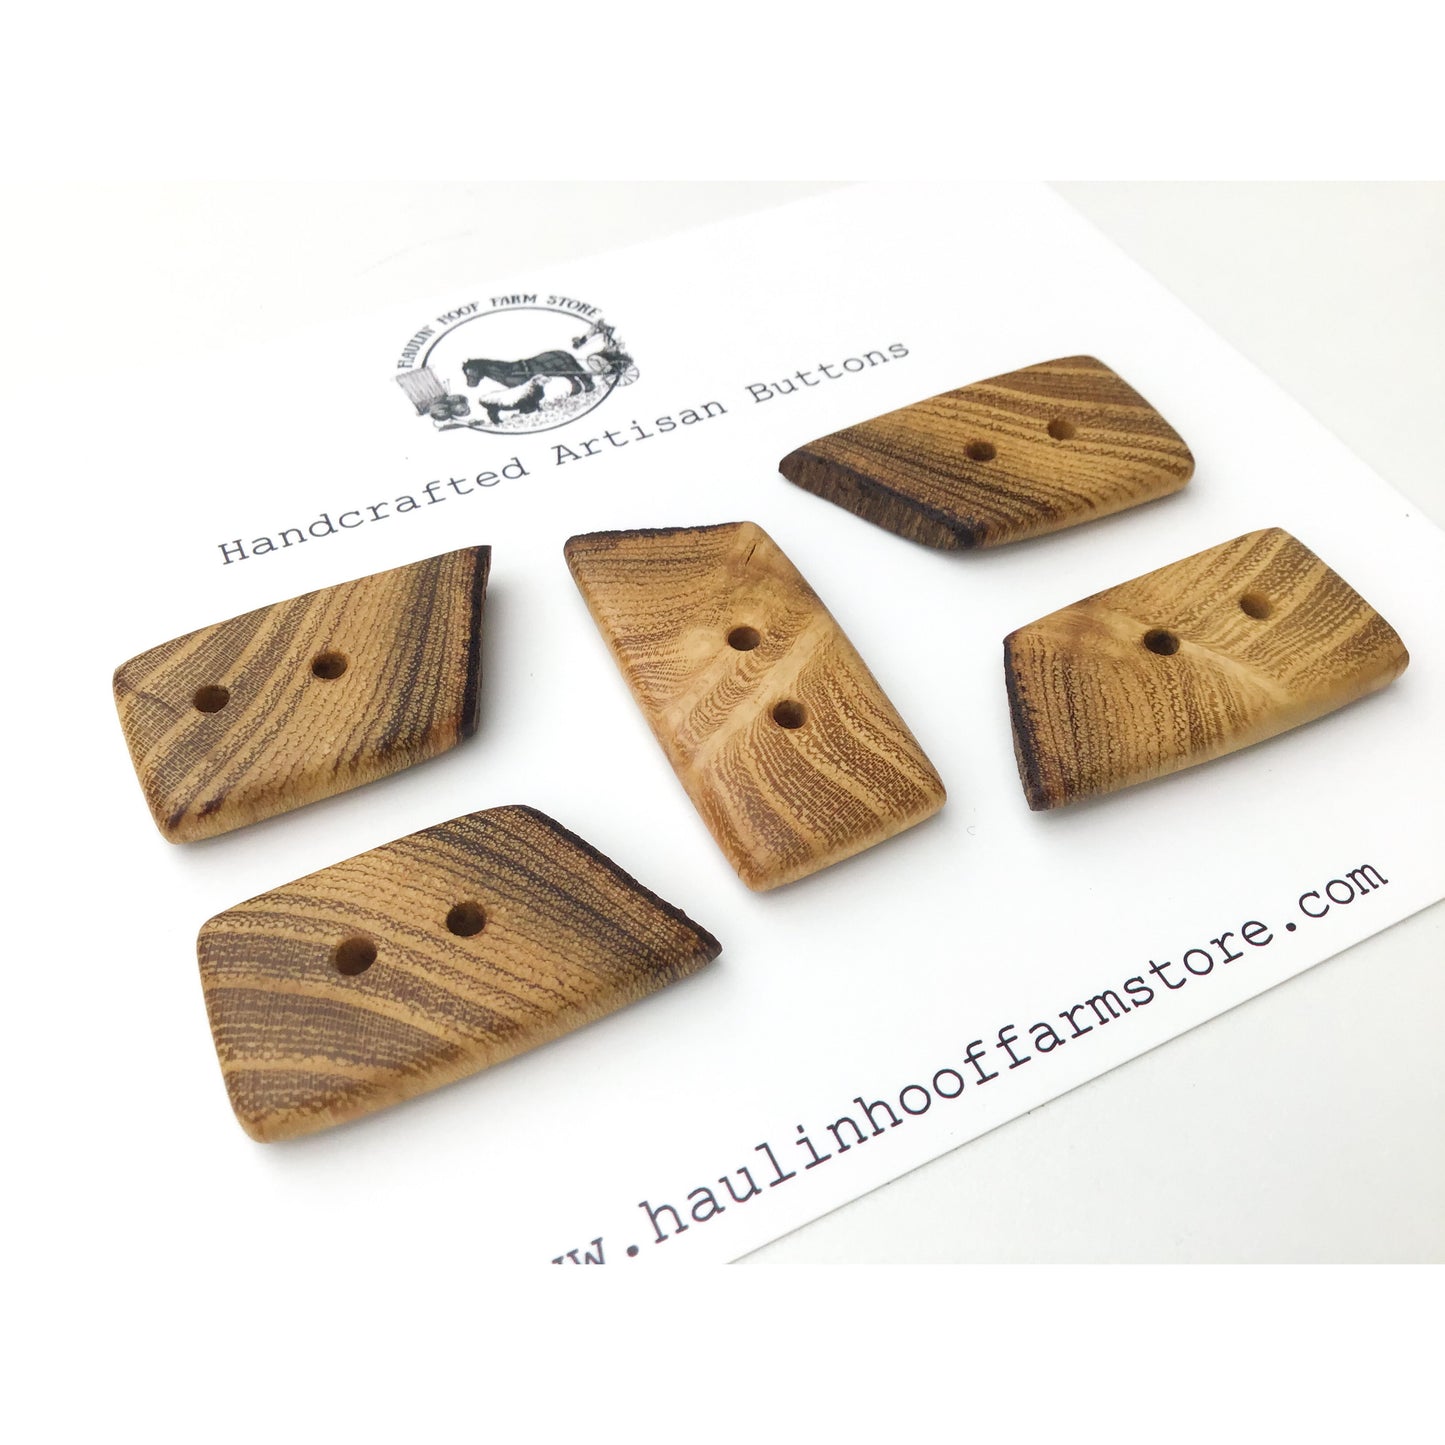 Black Locust Wood Buttons - Live Edge Wood Buttons - Wood Toggle Buttons - 3/4" x 1 1/2" - 5 Pack